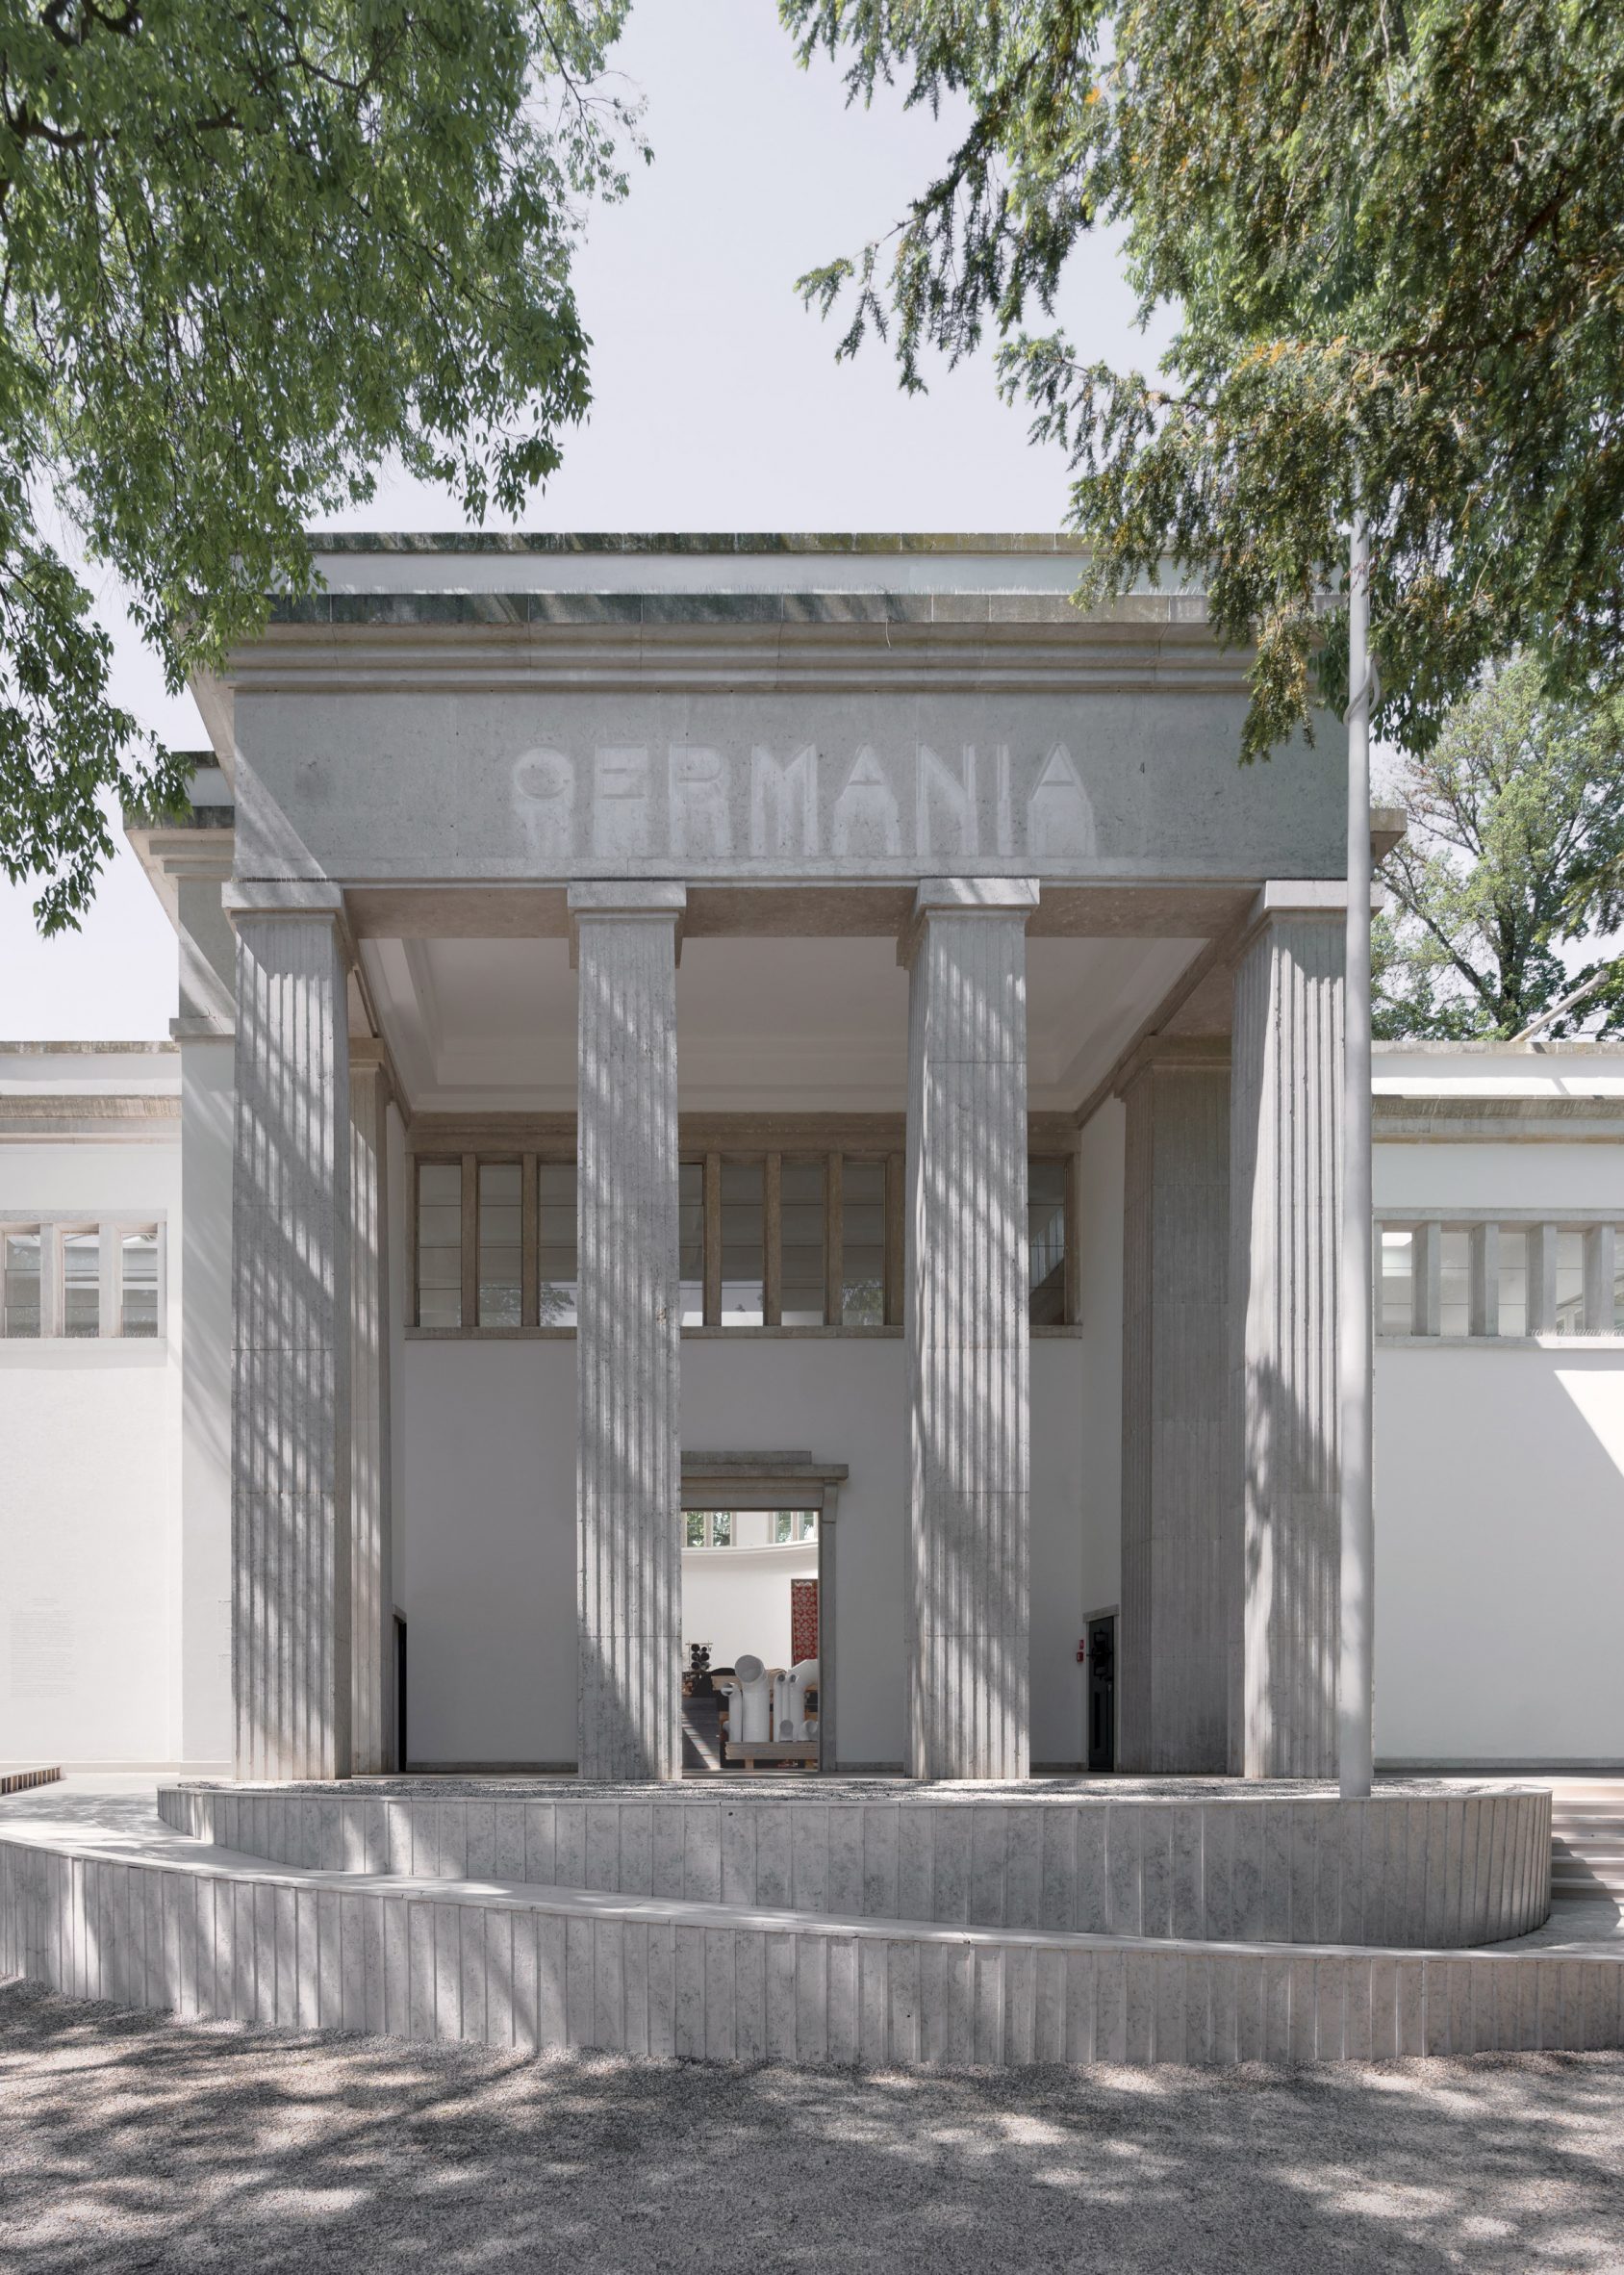 Ramp outside Open for Maintenance, the German Pavilion at the Venice Architecture Biennale 2023